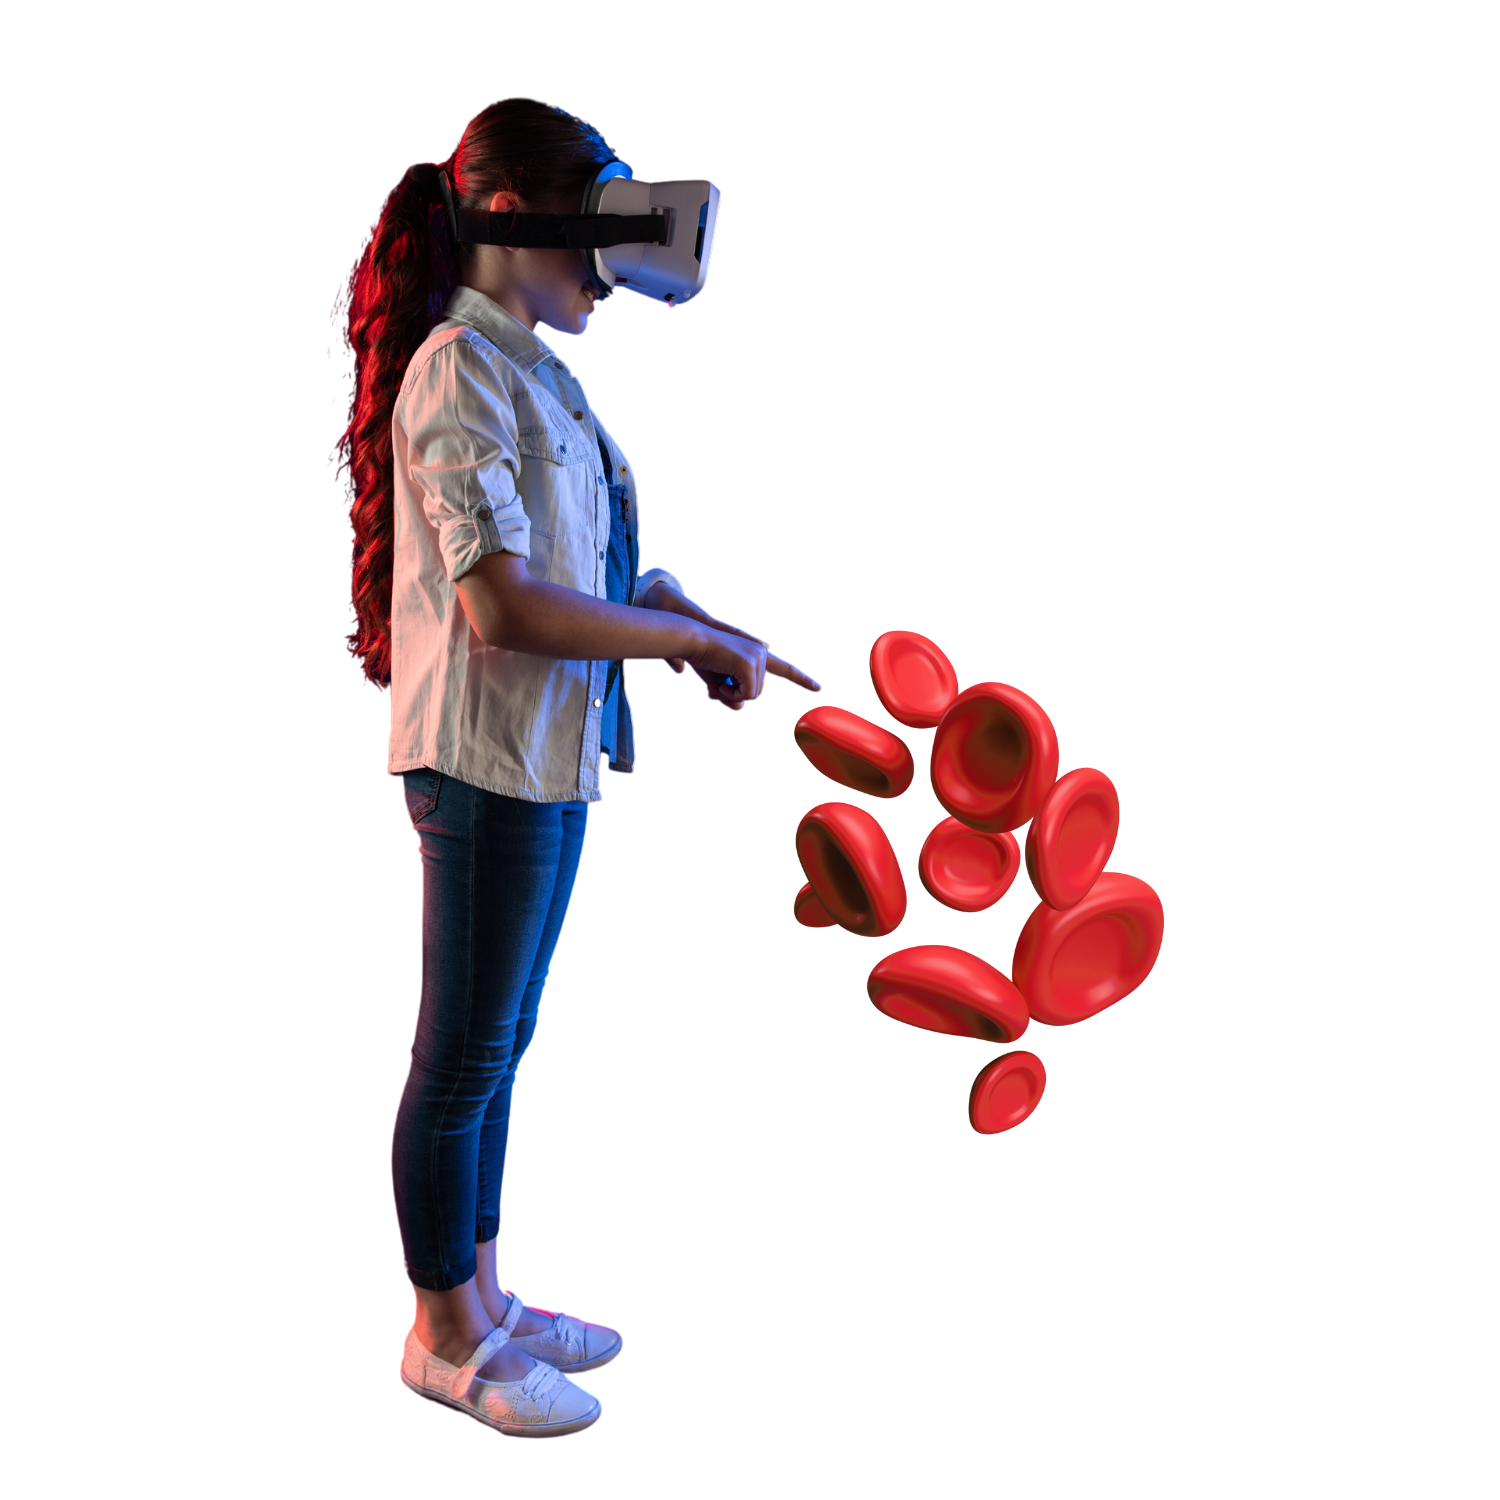 Revolutionize the way students learn through immersive experiences